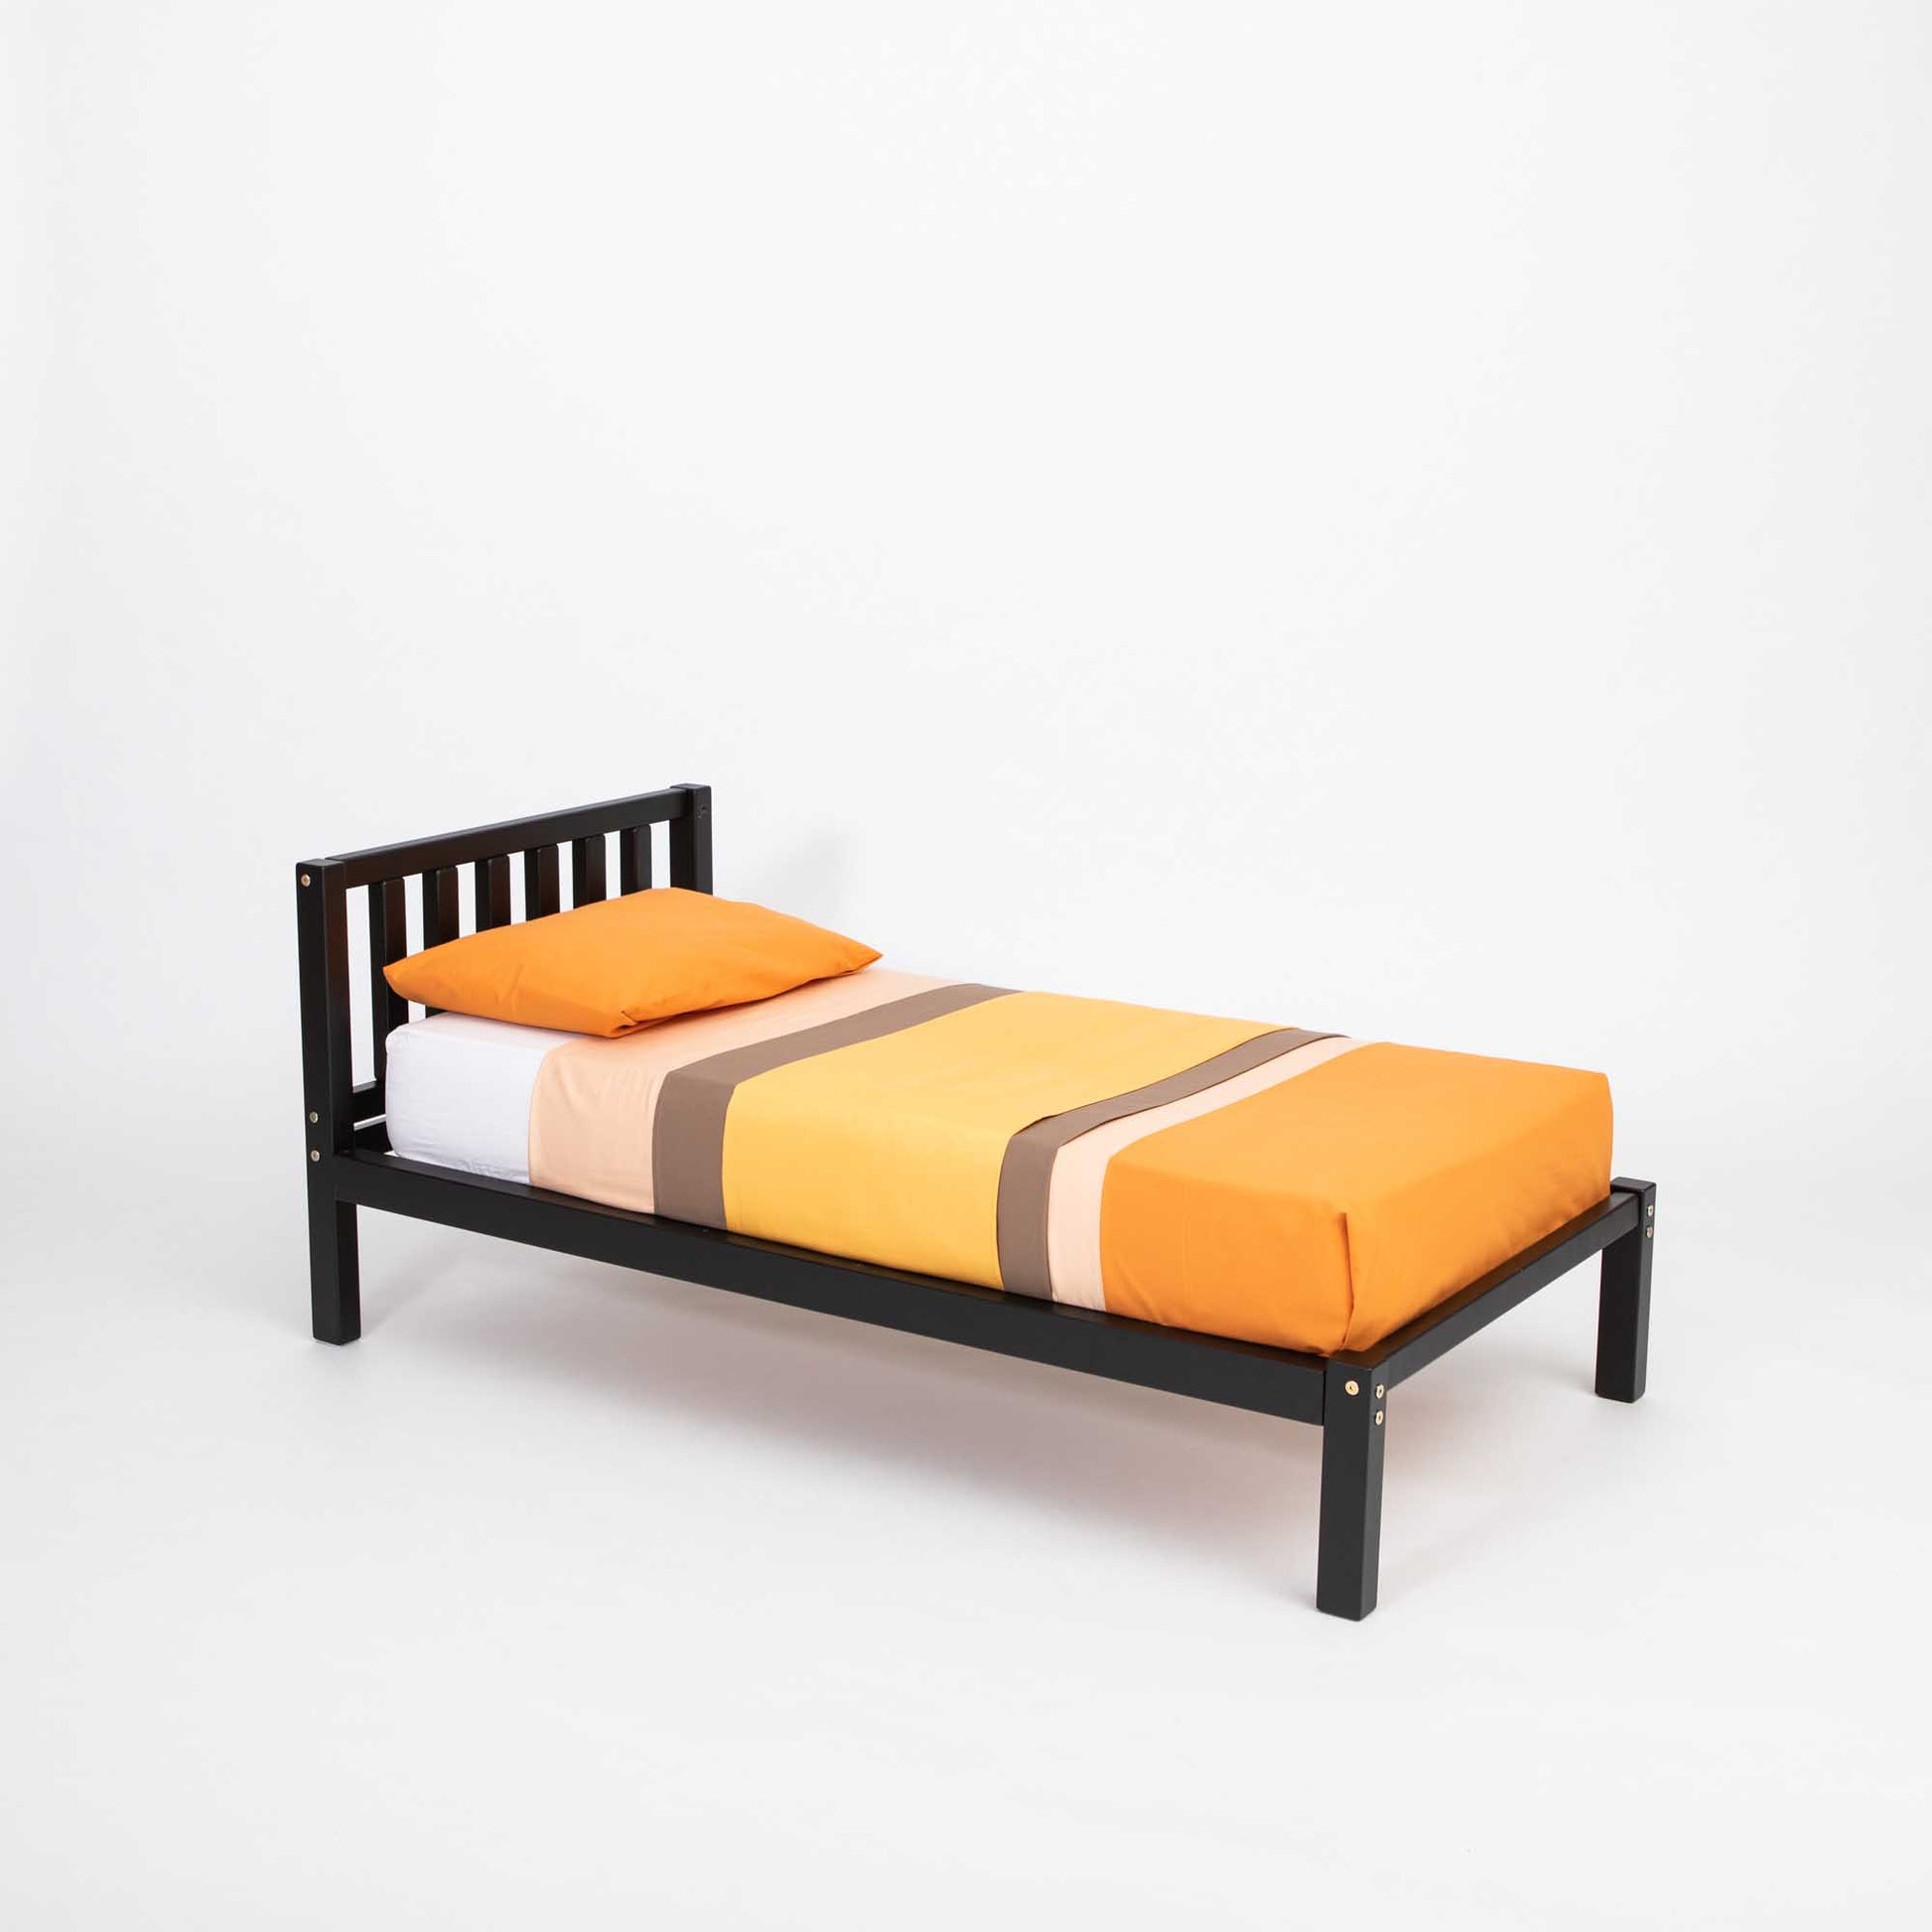 A Sweet Home From Wood Montessori-inspired children's bed on legs with a headboard, featuring a black frame and orange sheets, promoting independence in a solid wood design.